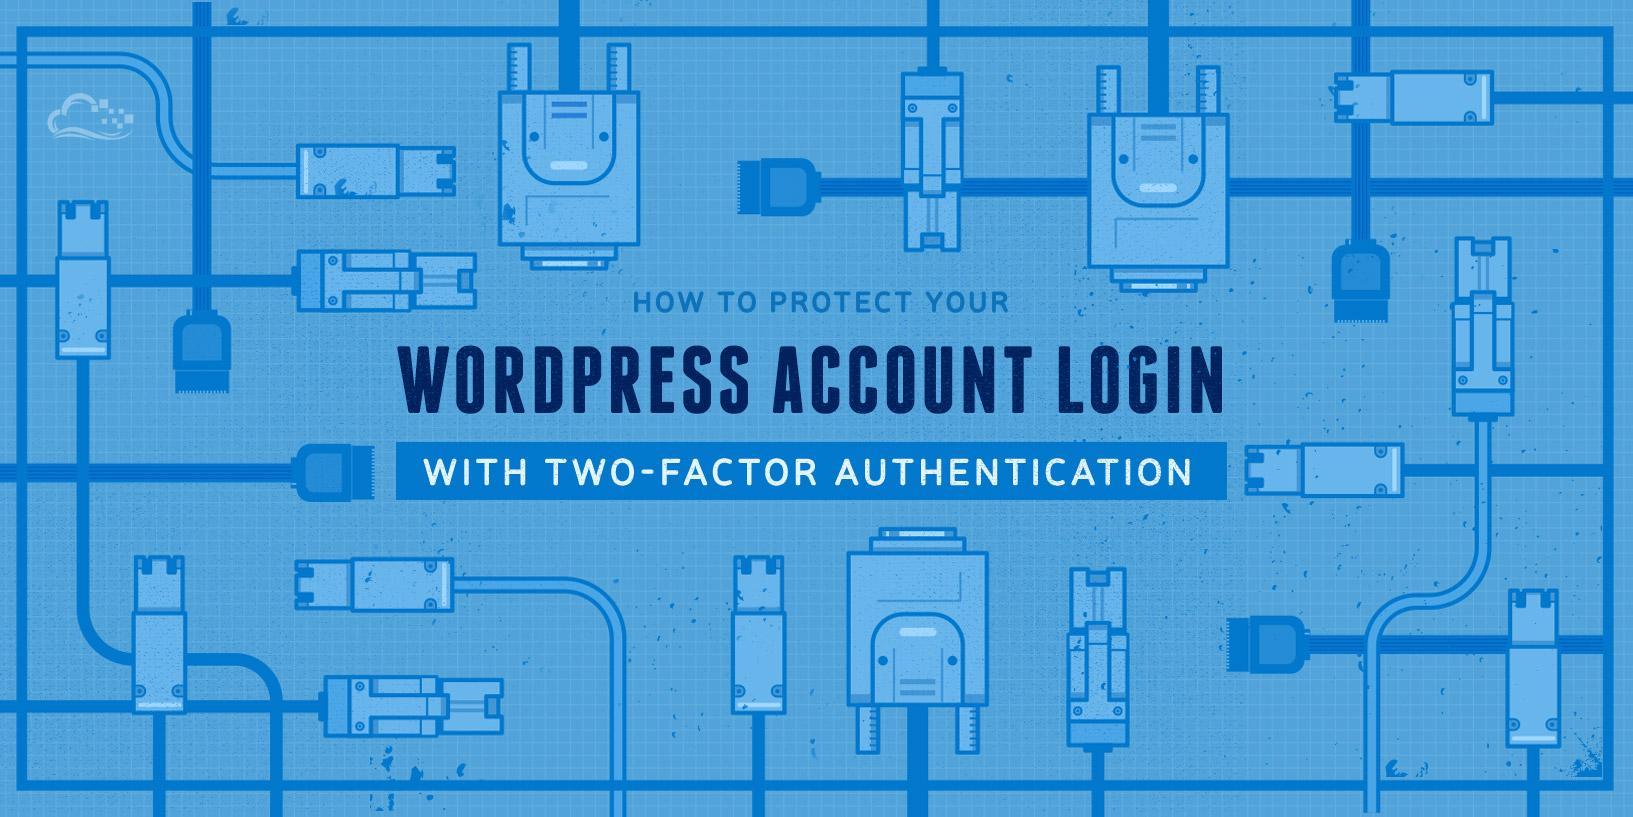 How To Protect Your WordPress Account Login with Two-Factor Authentication on Ubuntu 14.04